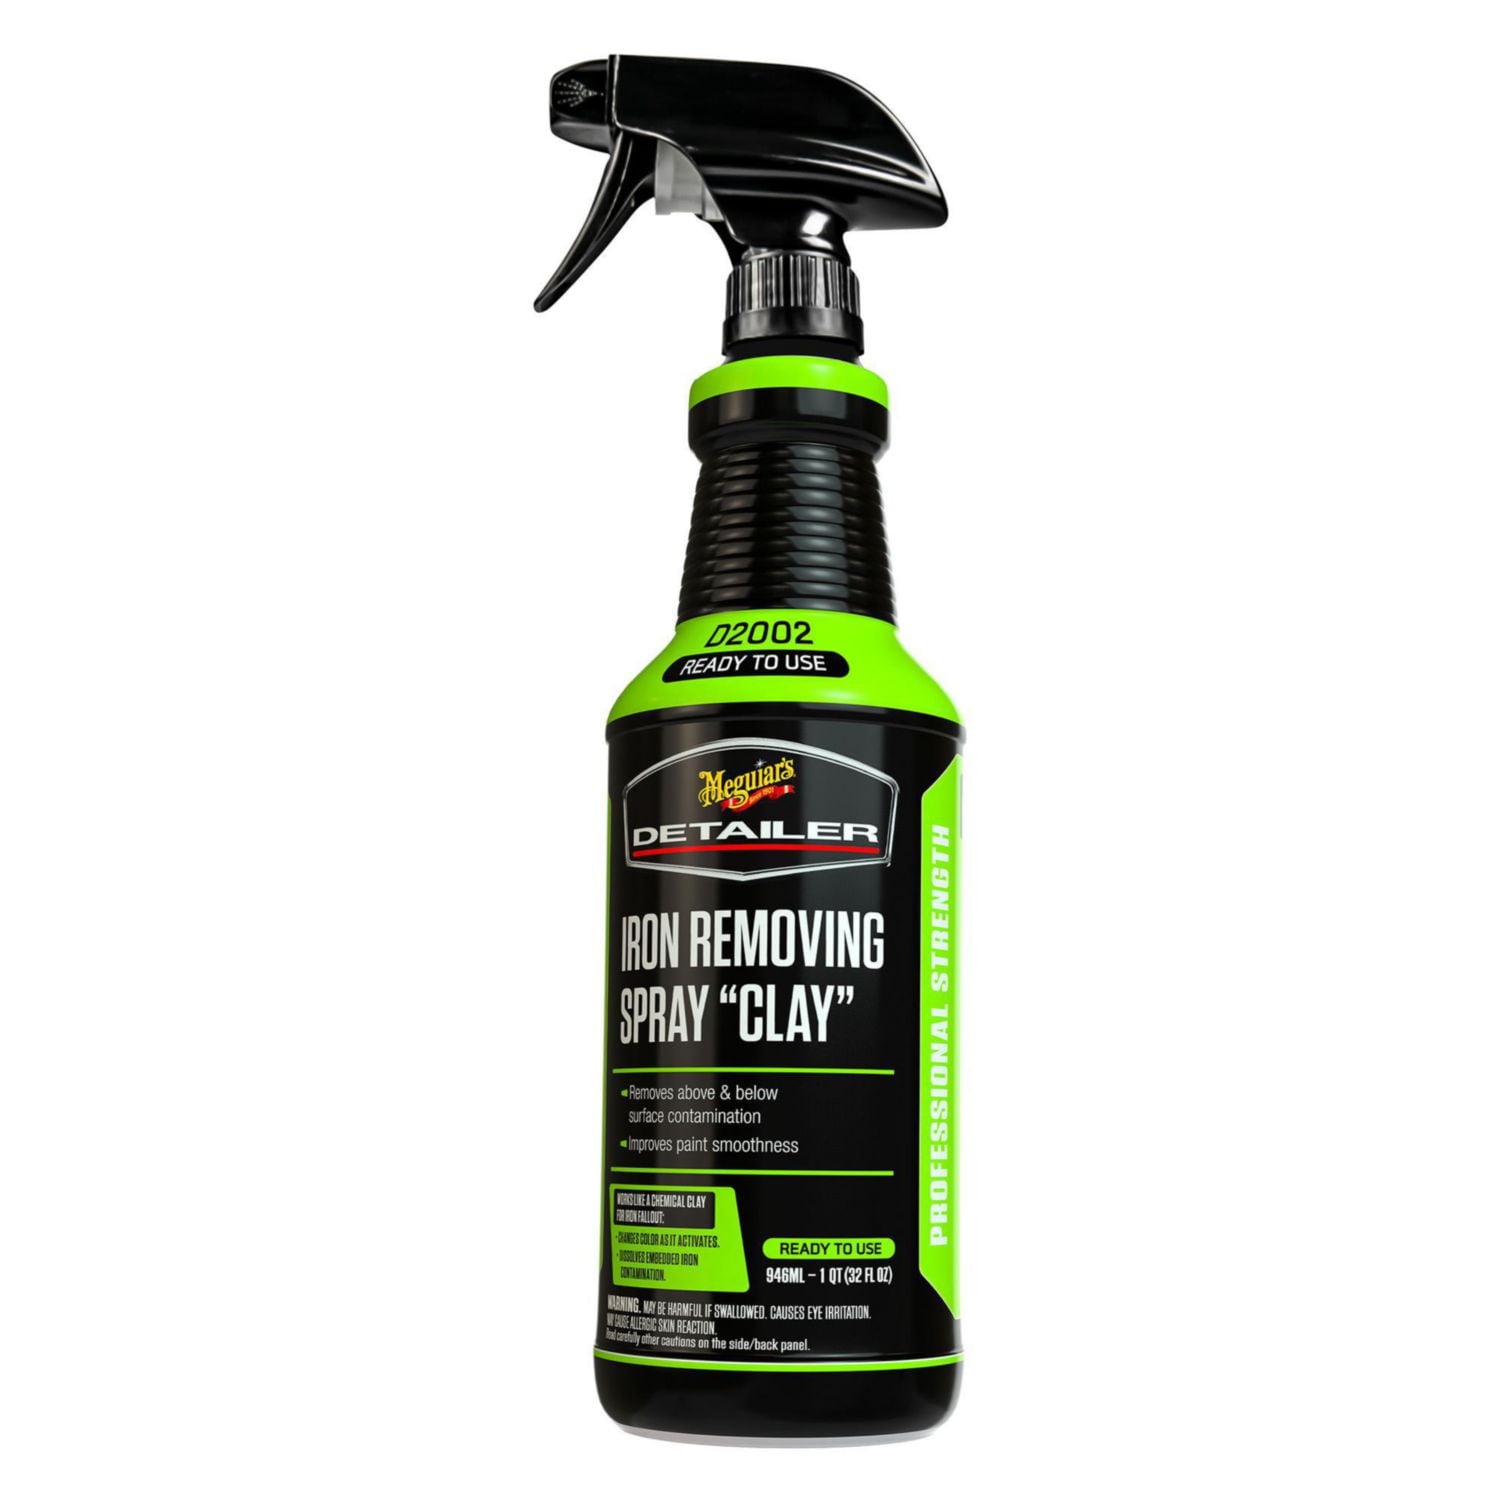 Meguiars Scratch Remover: Darren shows you why everyone will need this